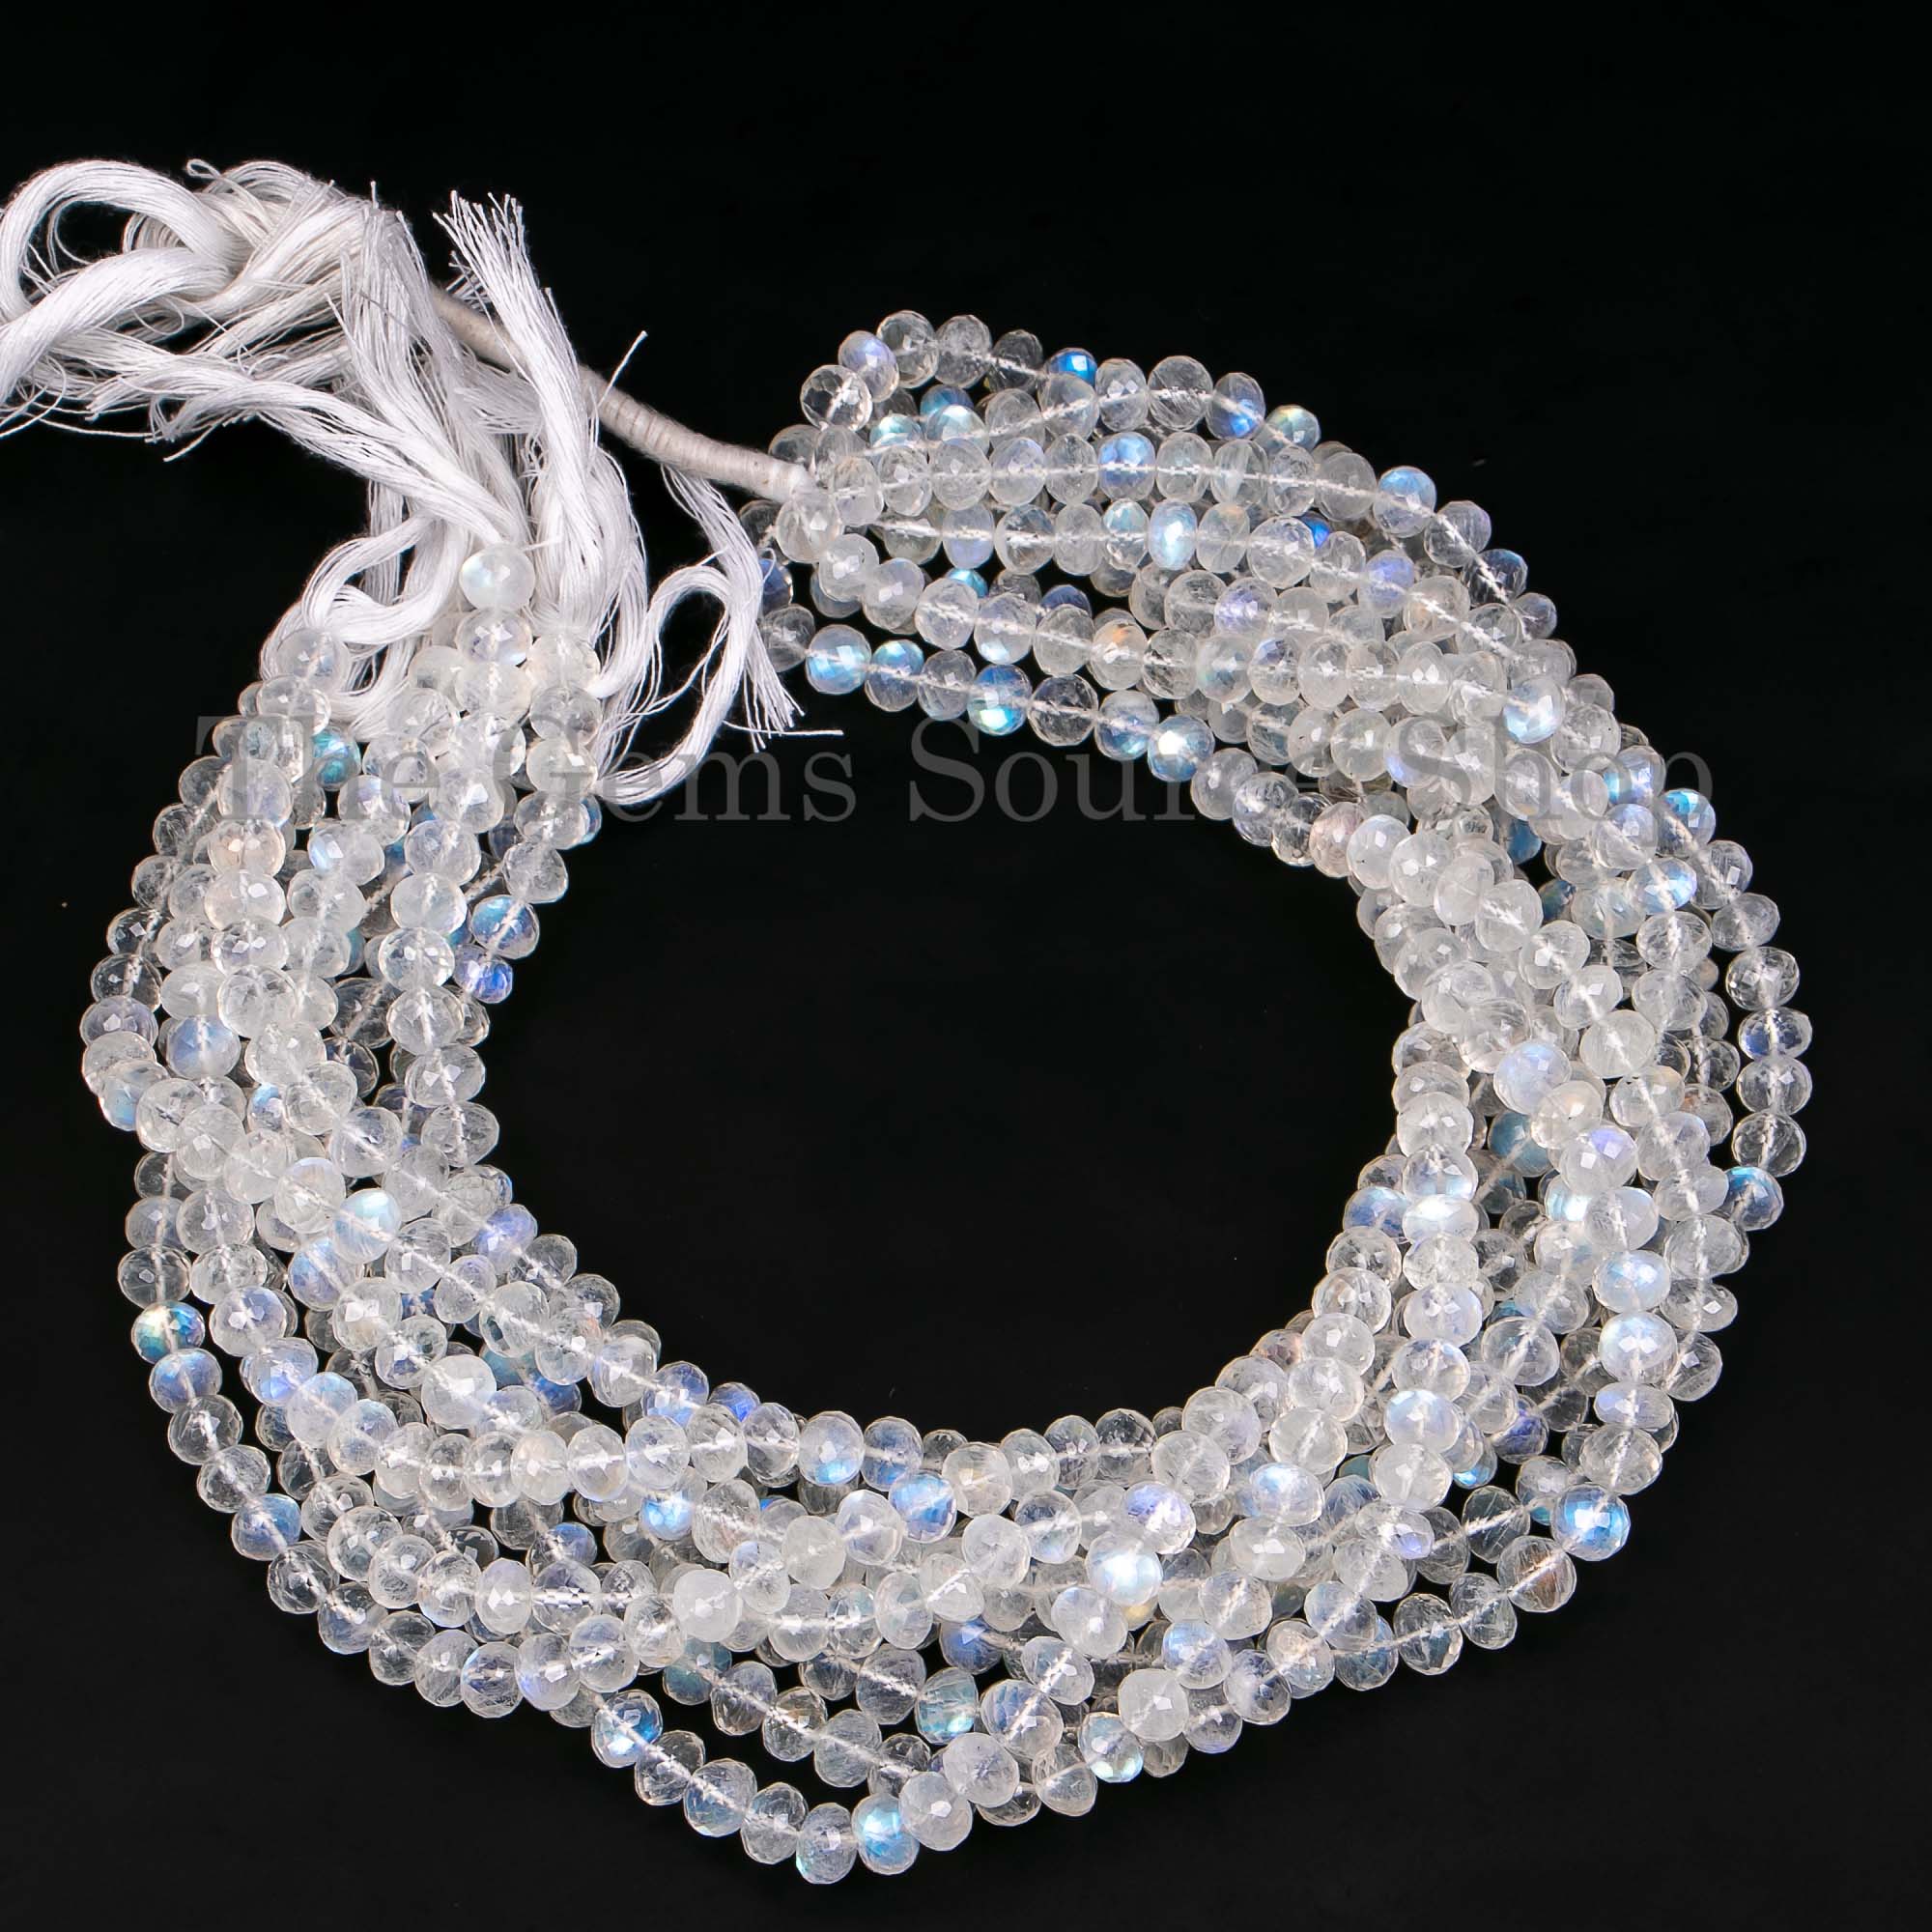 Super Top Quality Rainbow Moonstone Faceted Rondelle Shape Beads, Moonstone Beads